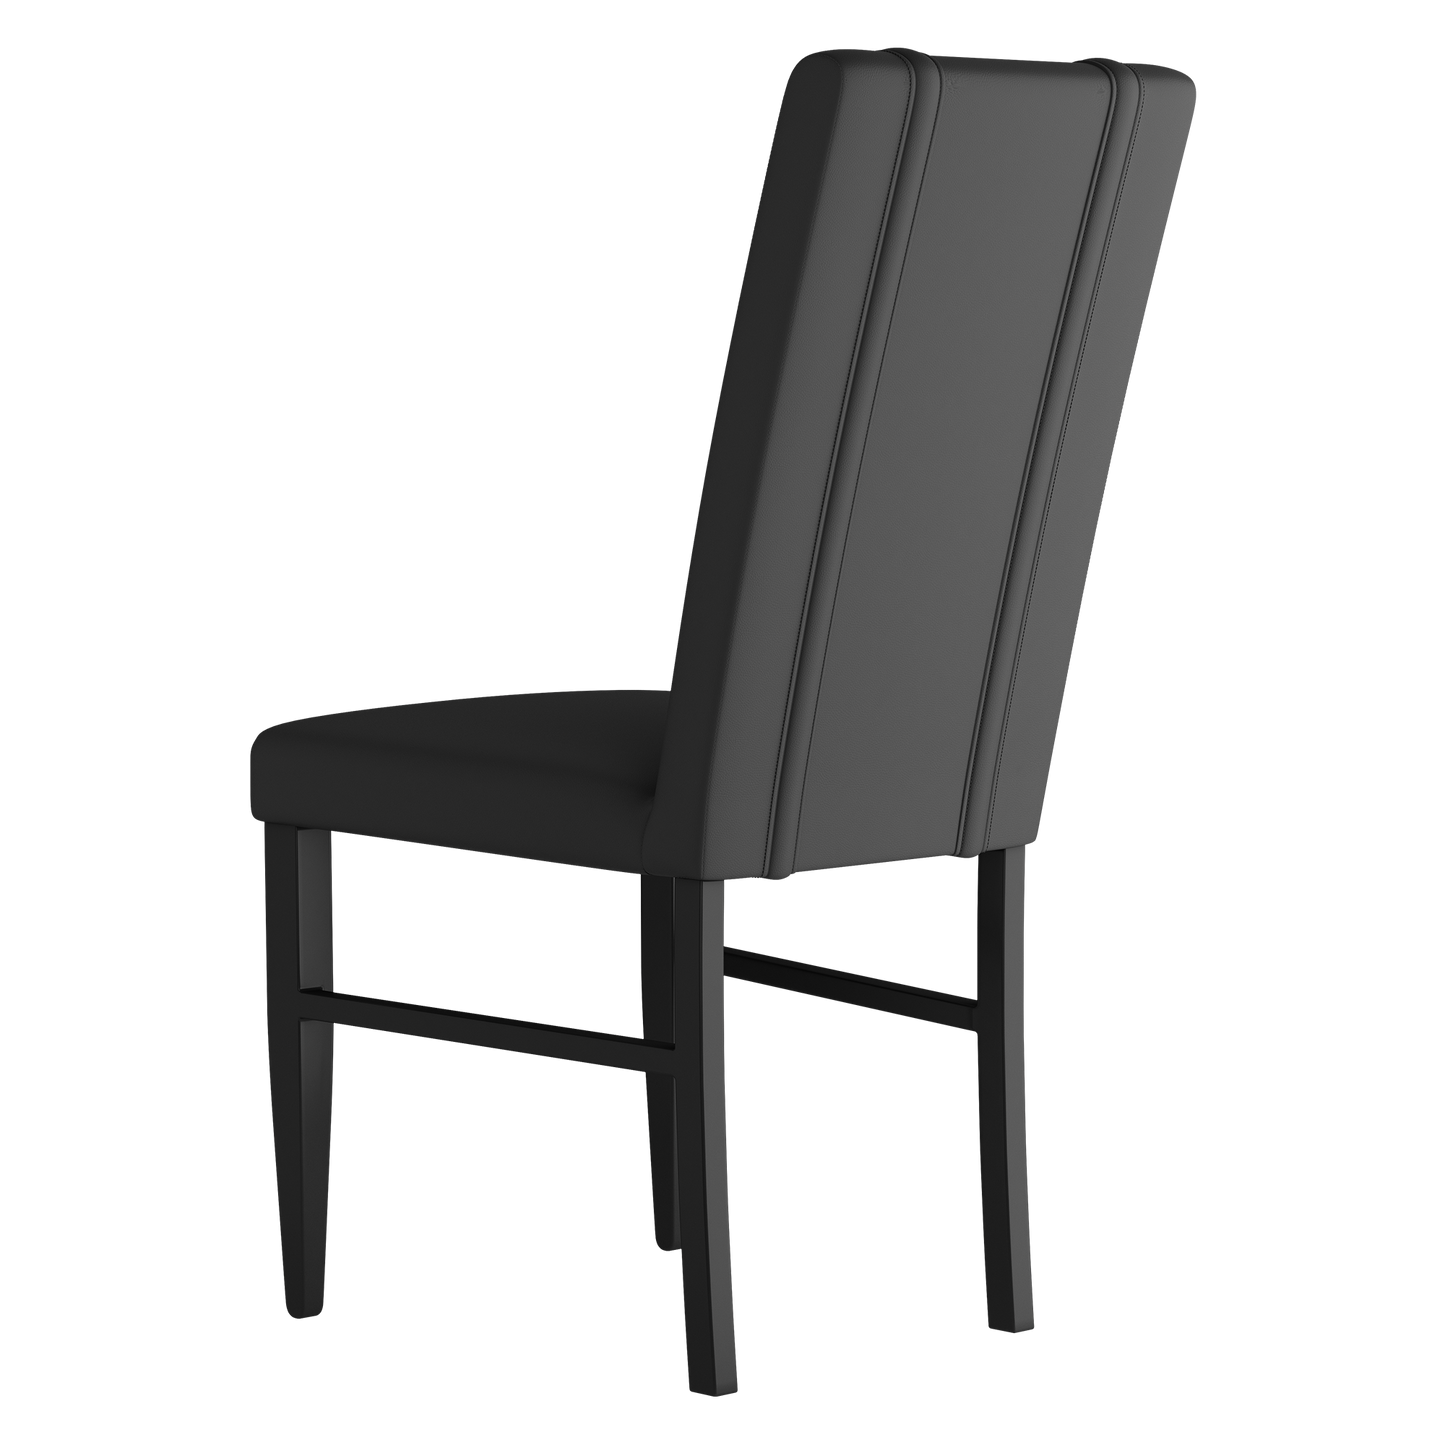 Side Chair 2000 with Rutgers Scarlet Knights Head Logo Set of 2